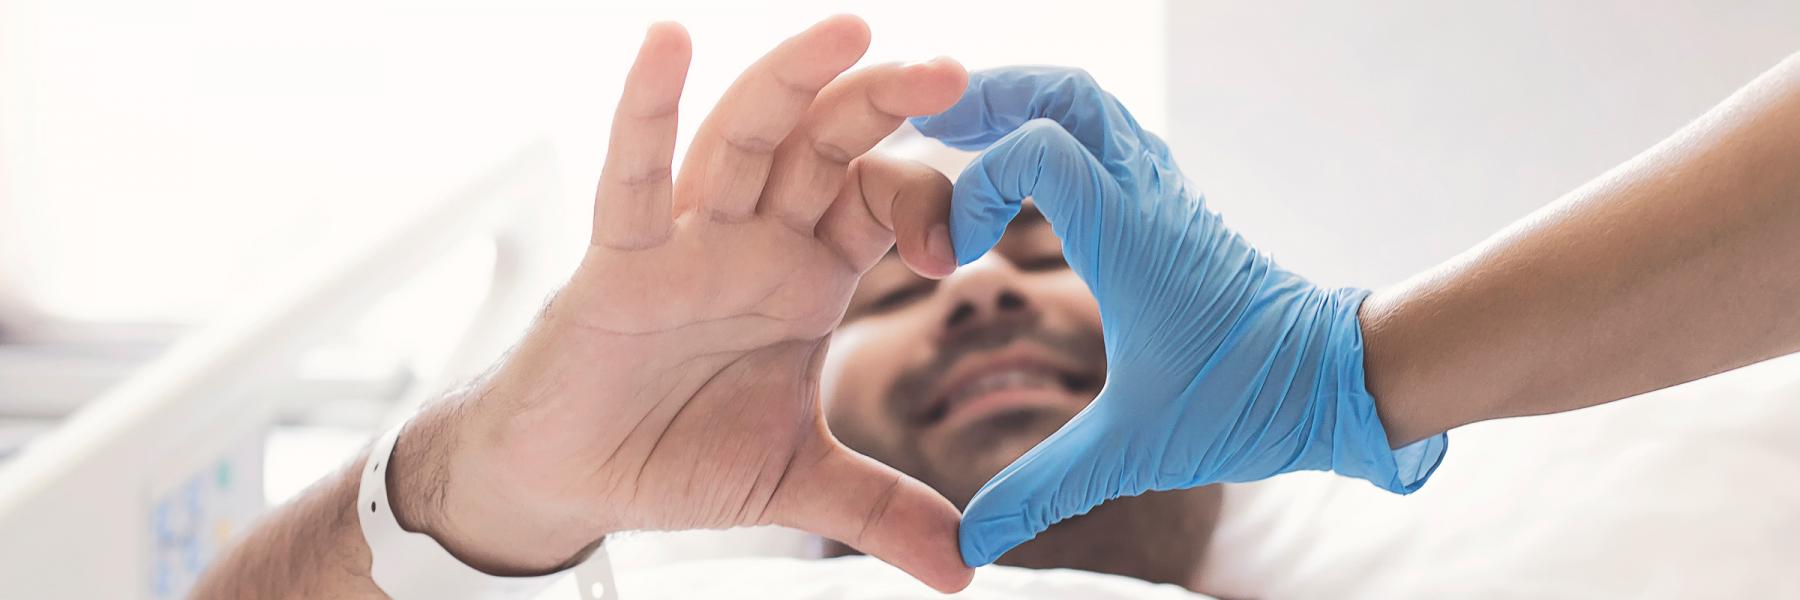 image of transplant surgery patient making heart hand symbol with doctor